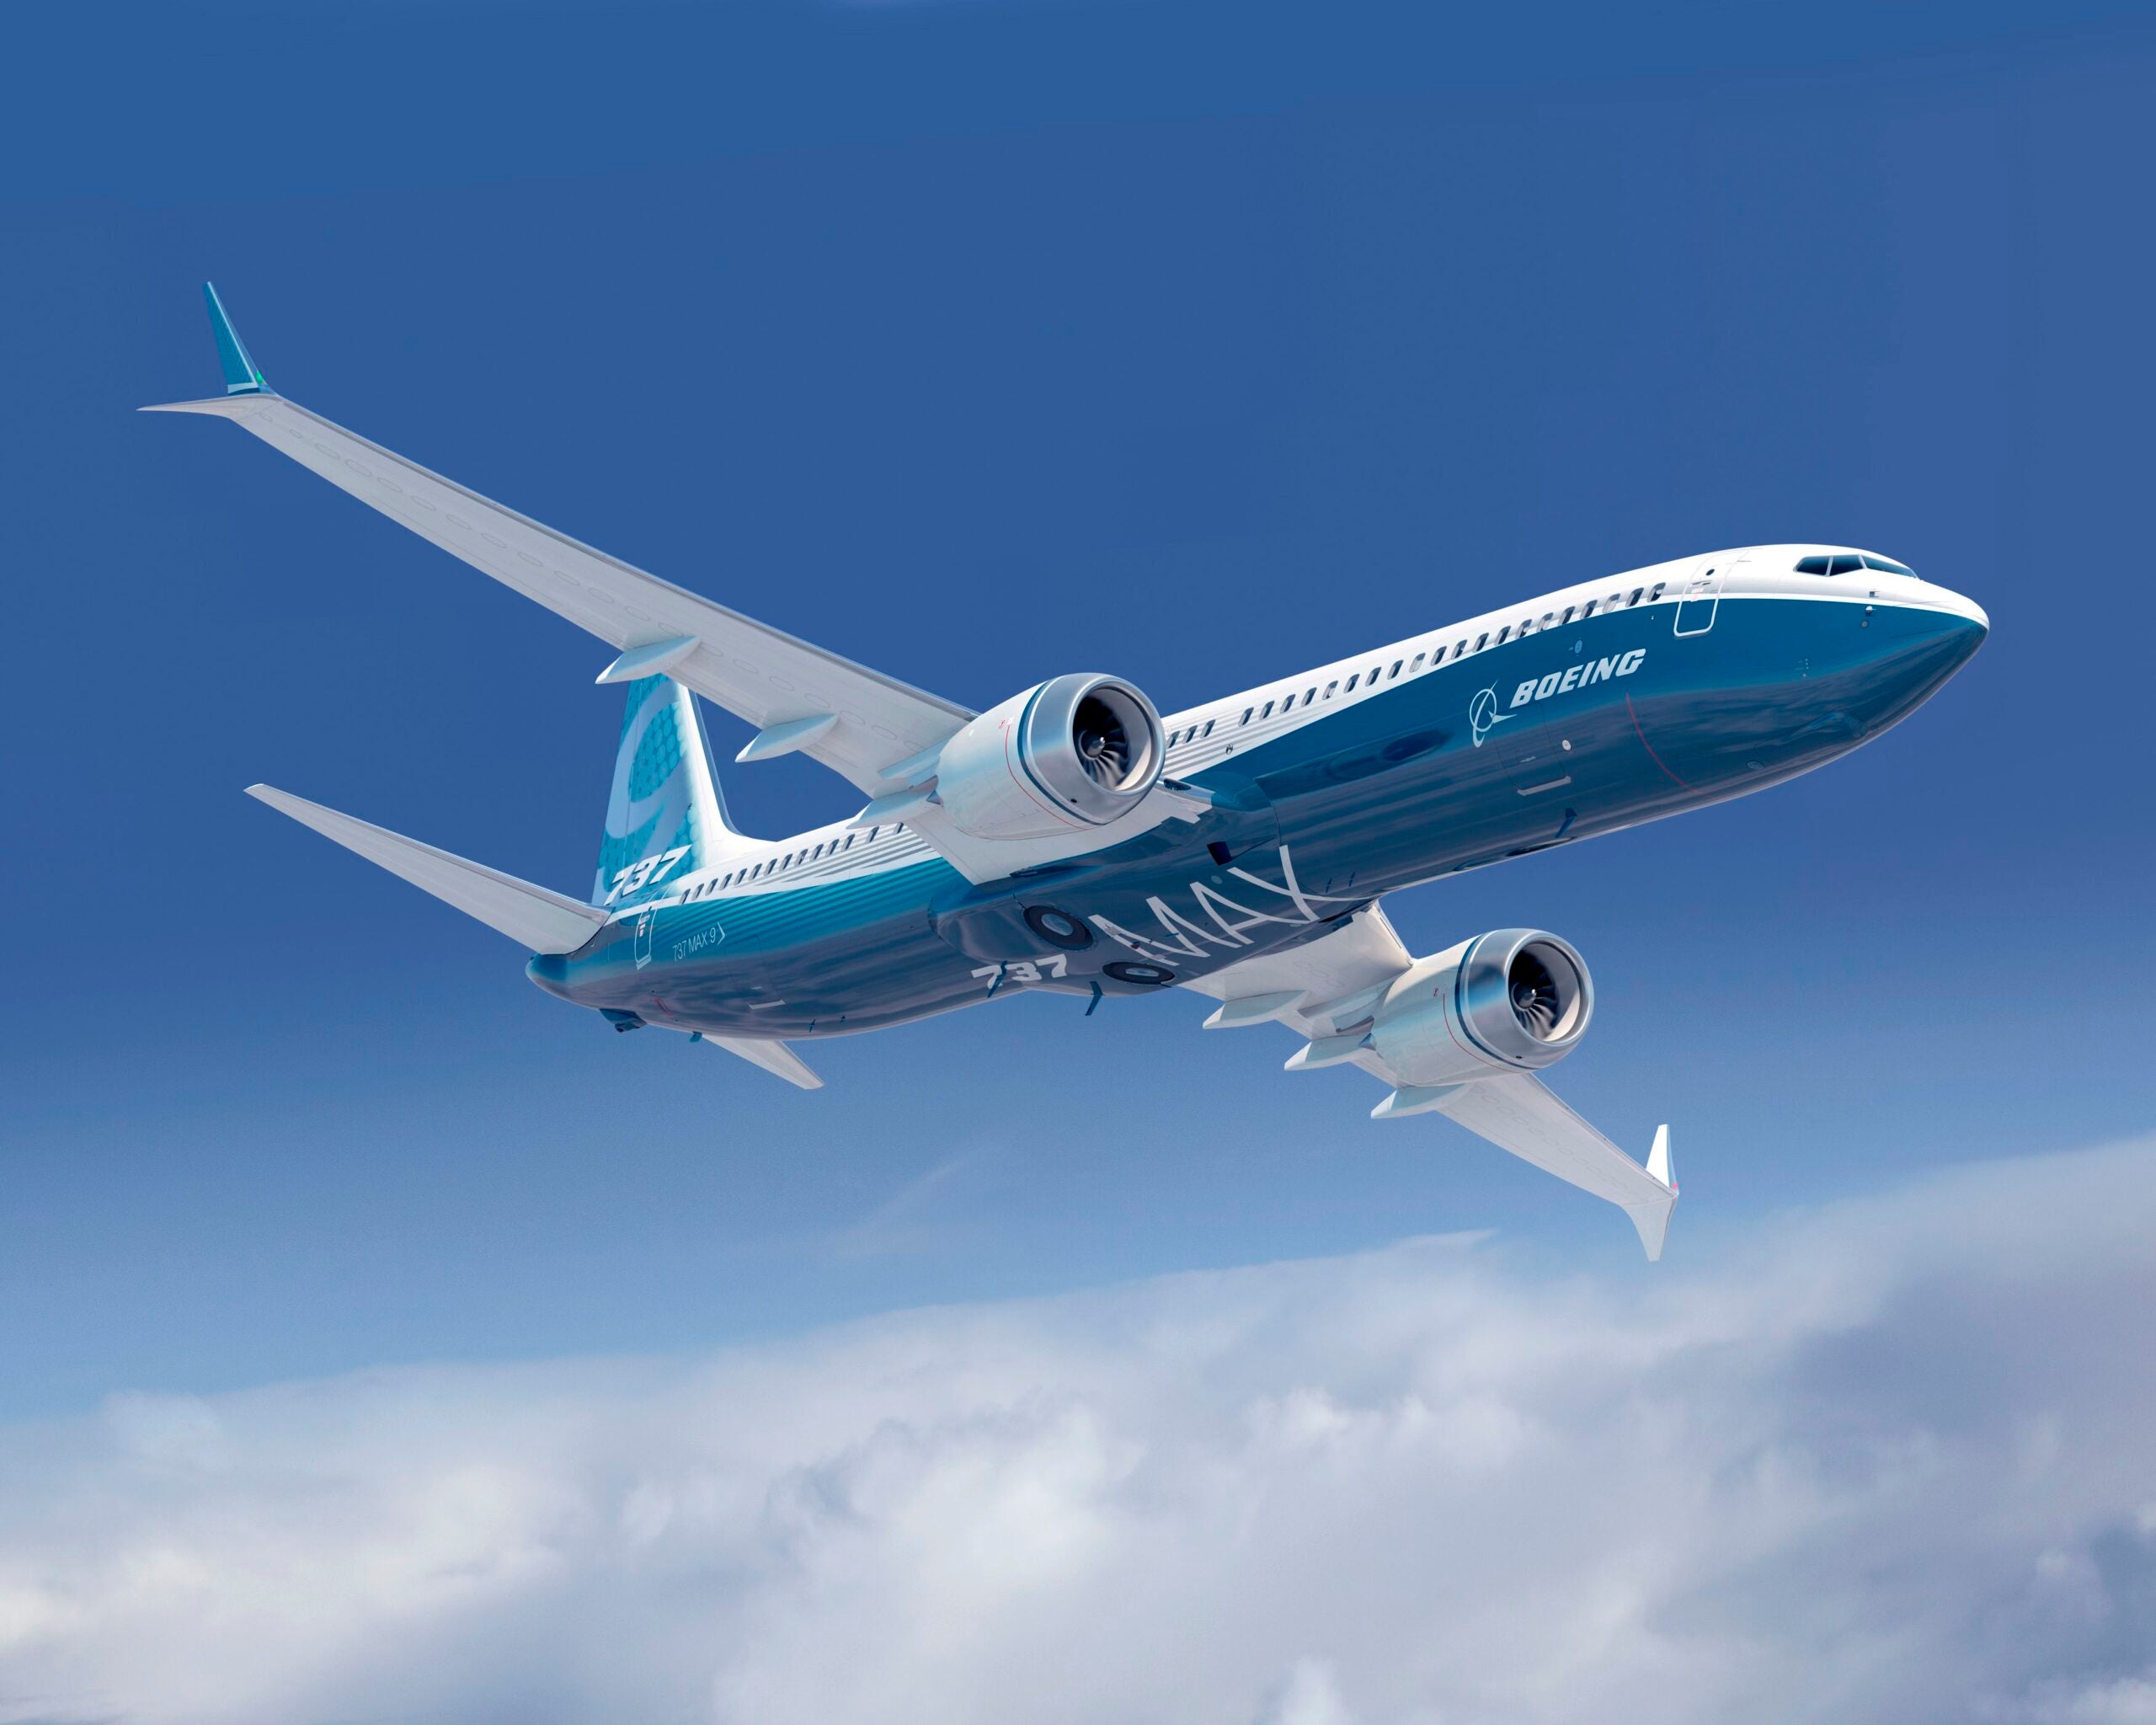 Boeing Confirms Discussions About Acquiring Spirit AeroSystems